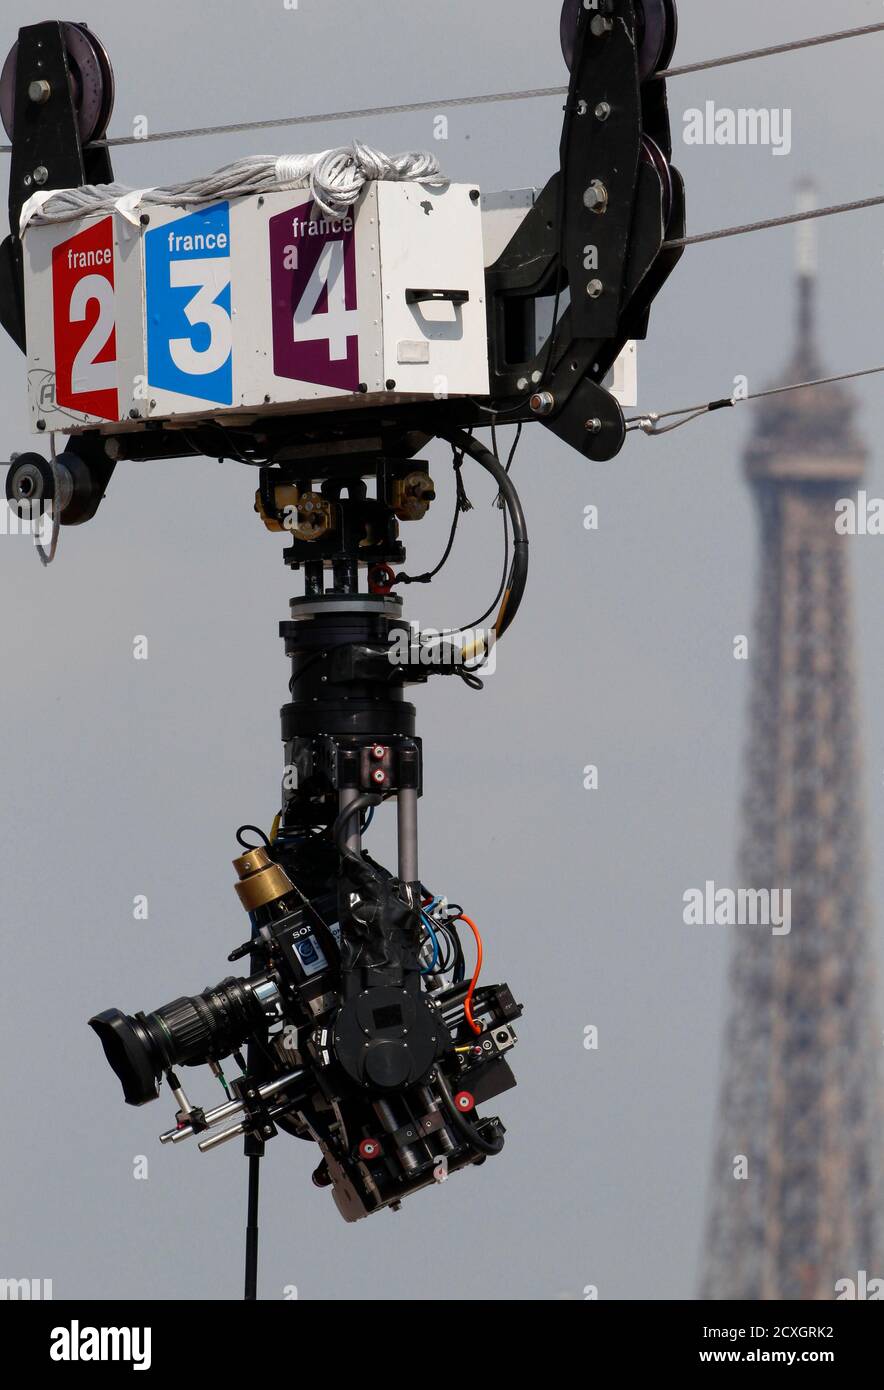 A France Television TV broadcast camera is pictured during the French Open  tennis tournament at the Roland Garros stadium in Paris May 29, 2012. In  the background, the Eiffel Tower. REUTERS/Regis Duvignau (